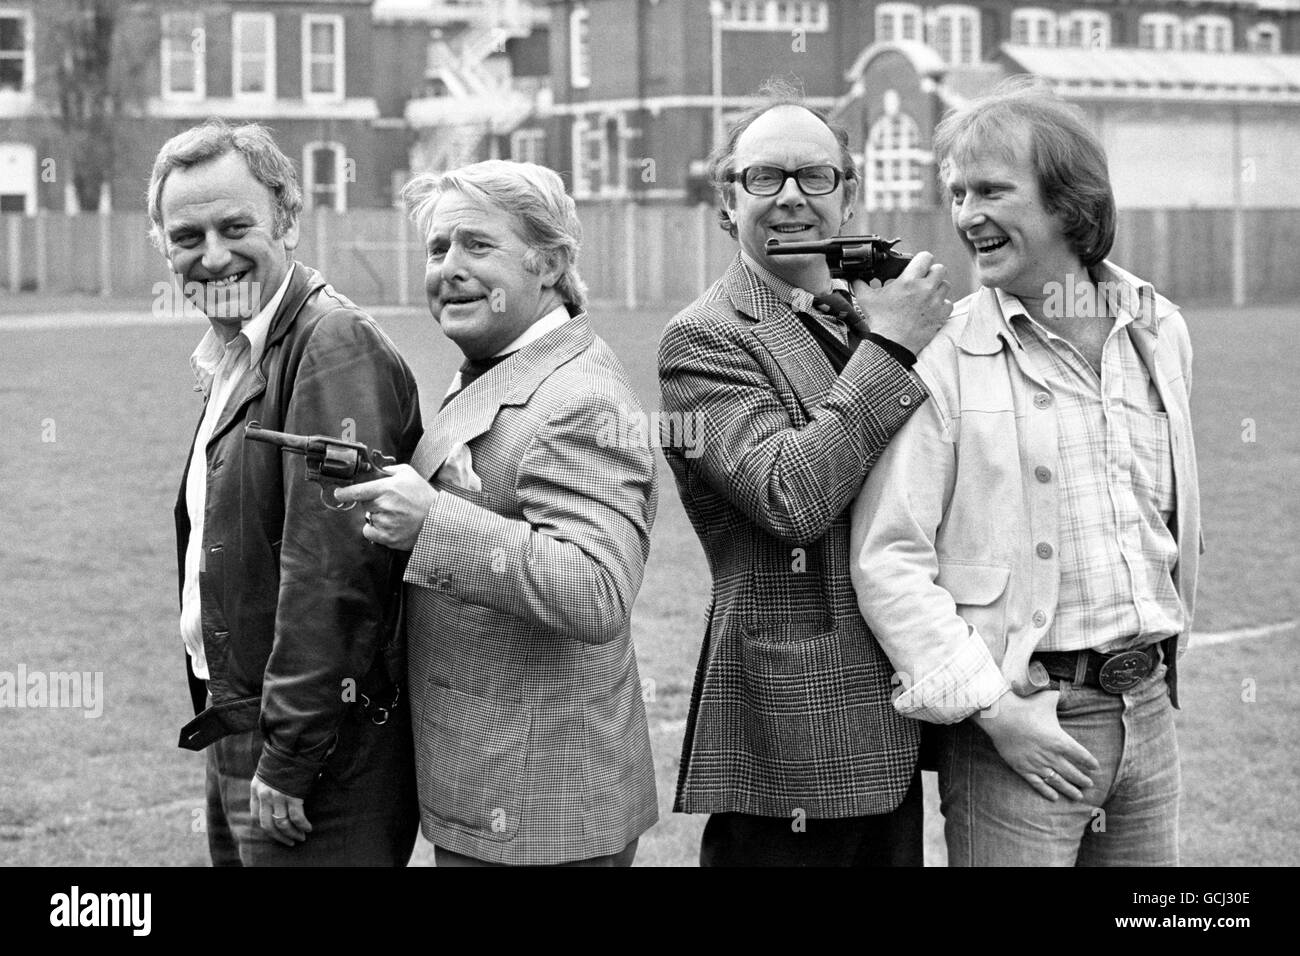 184262-1 Comedians Eric Morecambe and Ernie Wise in the Hammersmith grounds of Euston Films today, where they teamed up with tough crimebusters Carter and Regan of 'The Sweeney' Fame. Inspector Regan, actor John Thaw (left) and Det Sgt Carter, actor Dennis Waterman appeared as gusts on a Morecambe and Wise Christmas show in 1976. They joked they would only appear if Eric and Ernie agreed to appear in their show, and now the quartet will play in The Sweeney: 'Hearts and Minds' an episode of the next series on ITV. Stock Photo